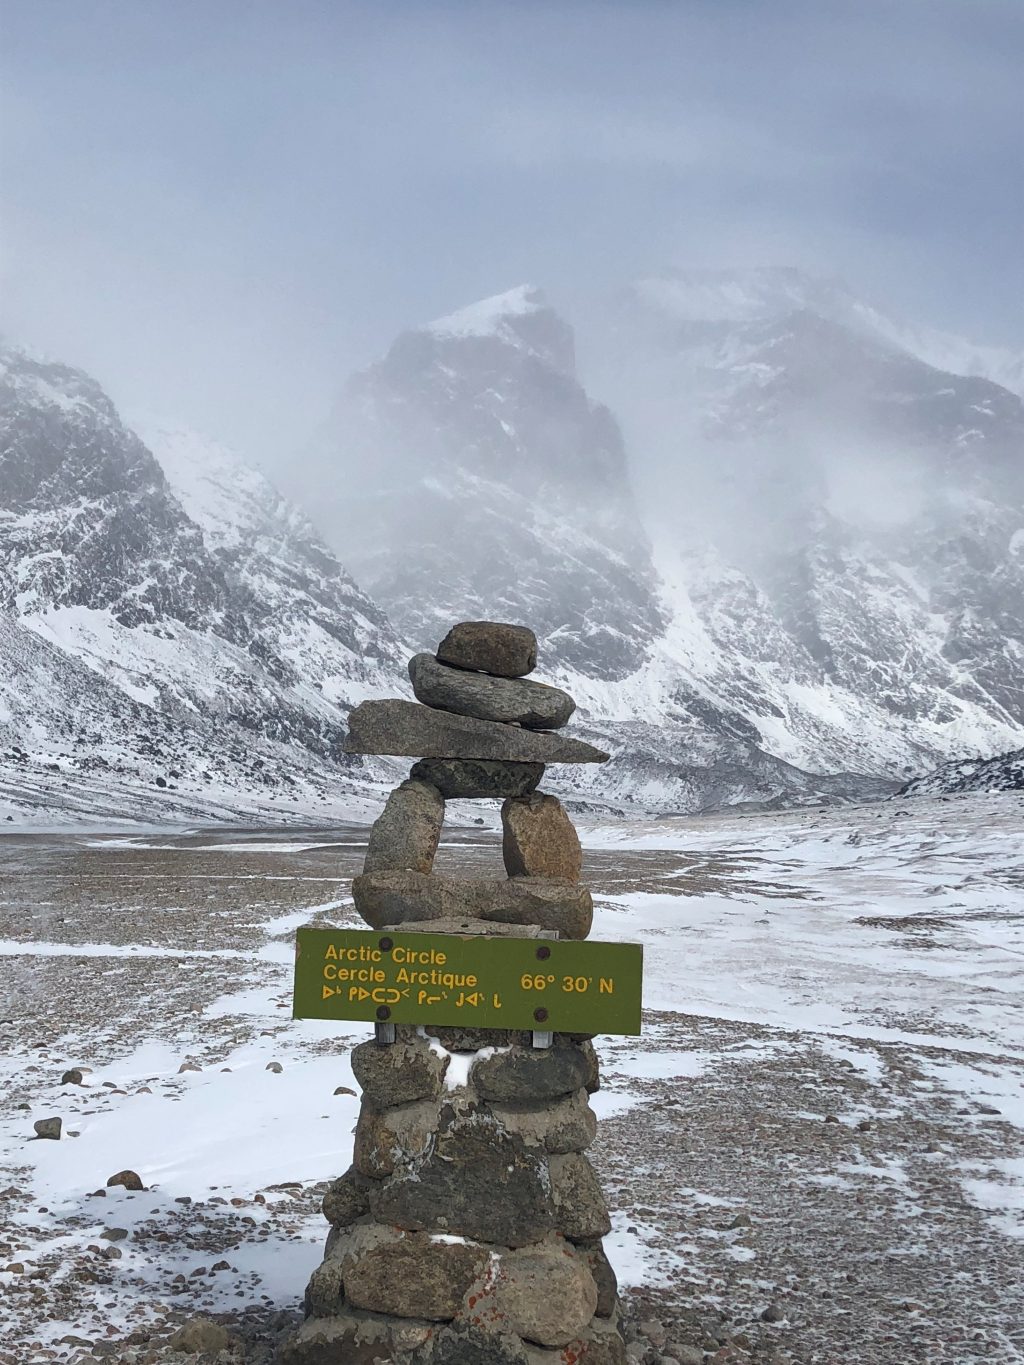 An inukshuk stone stack locating the Arctic Circle, with snow and mist covered mountains behind